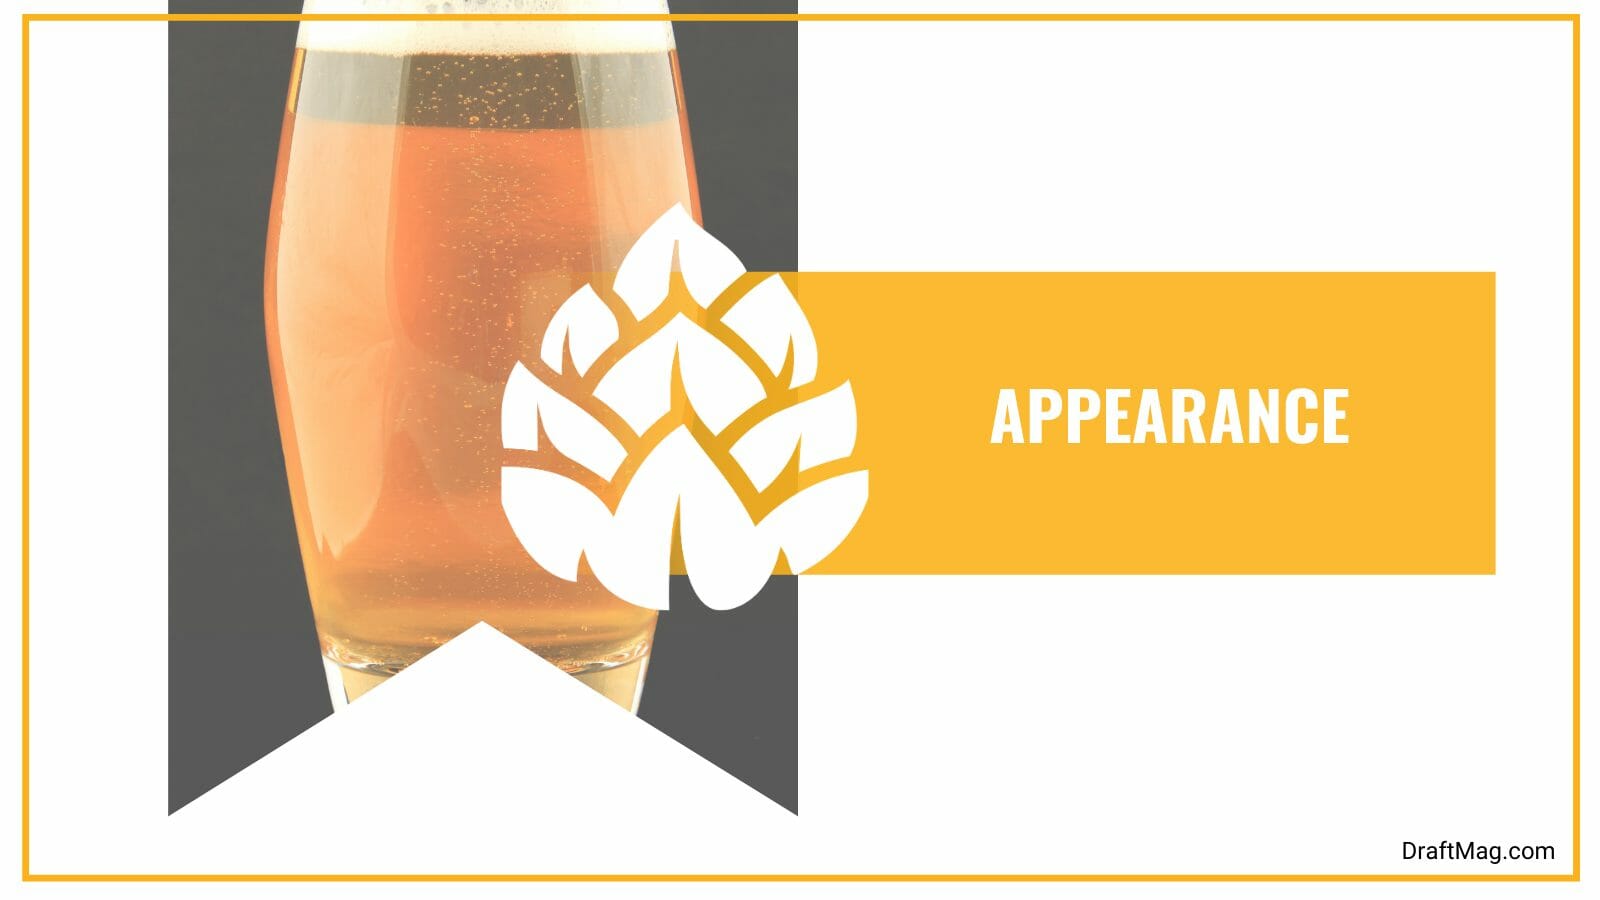 Appearance of Gold Cliff IPA